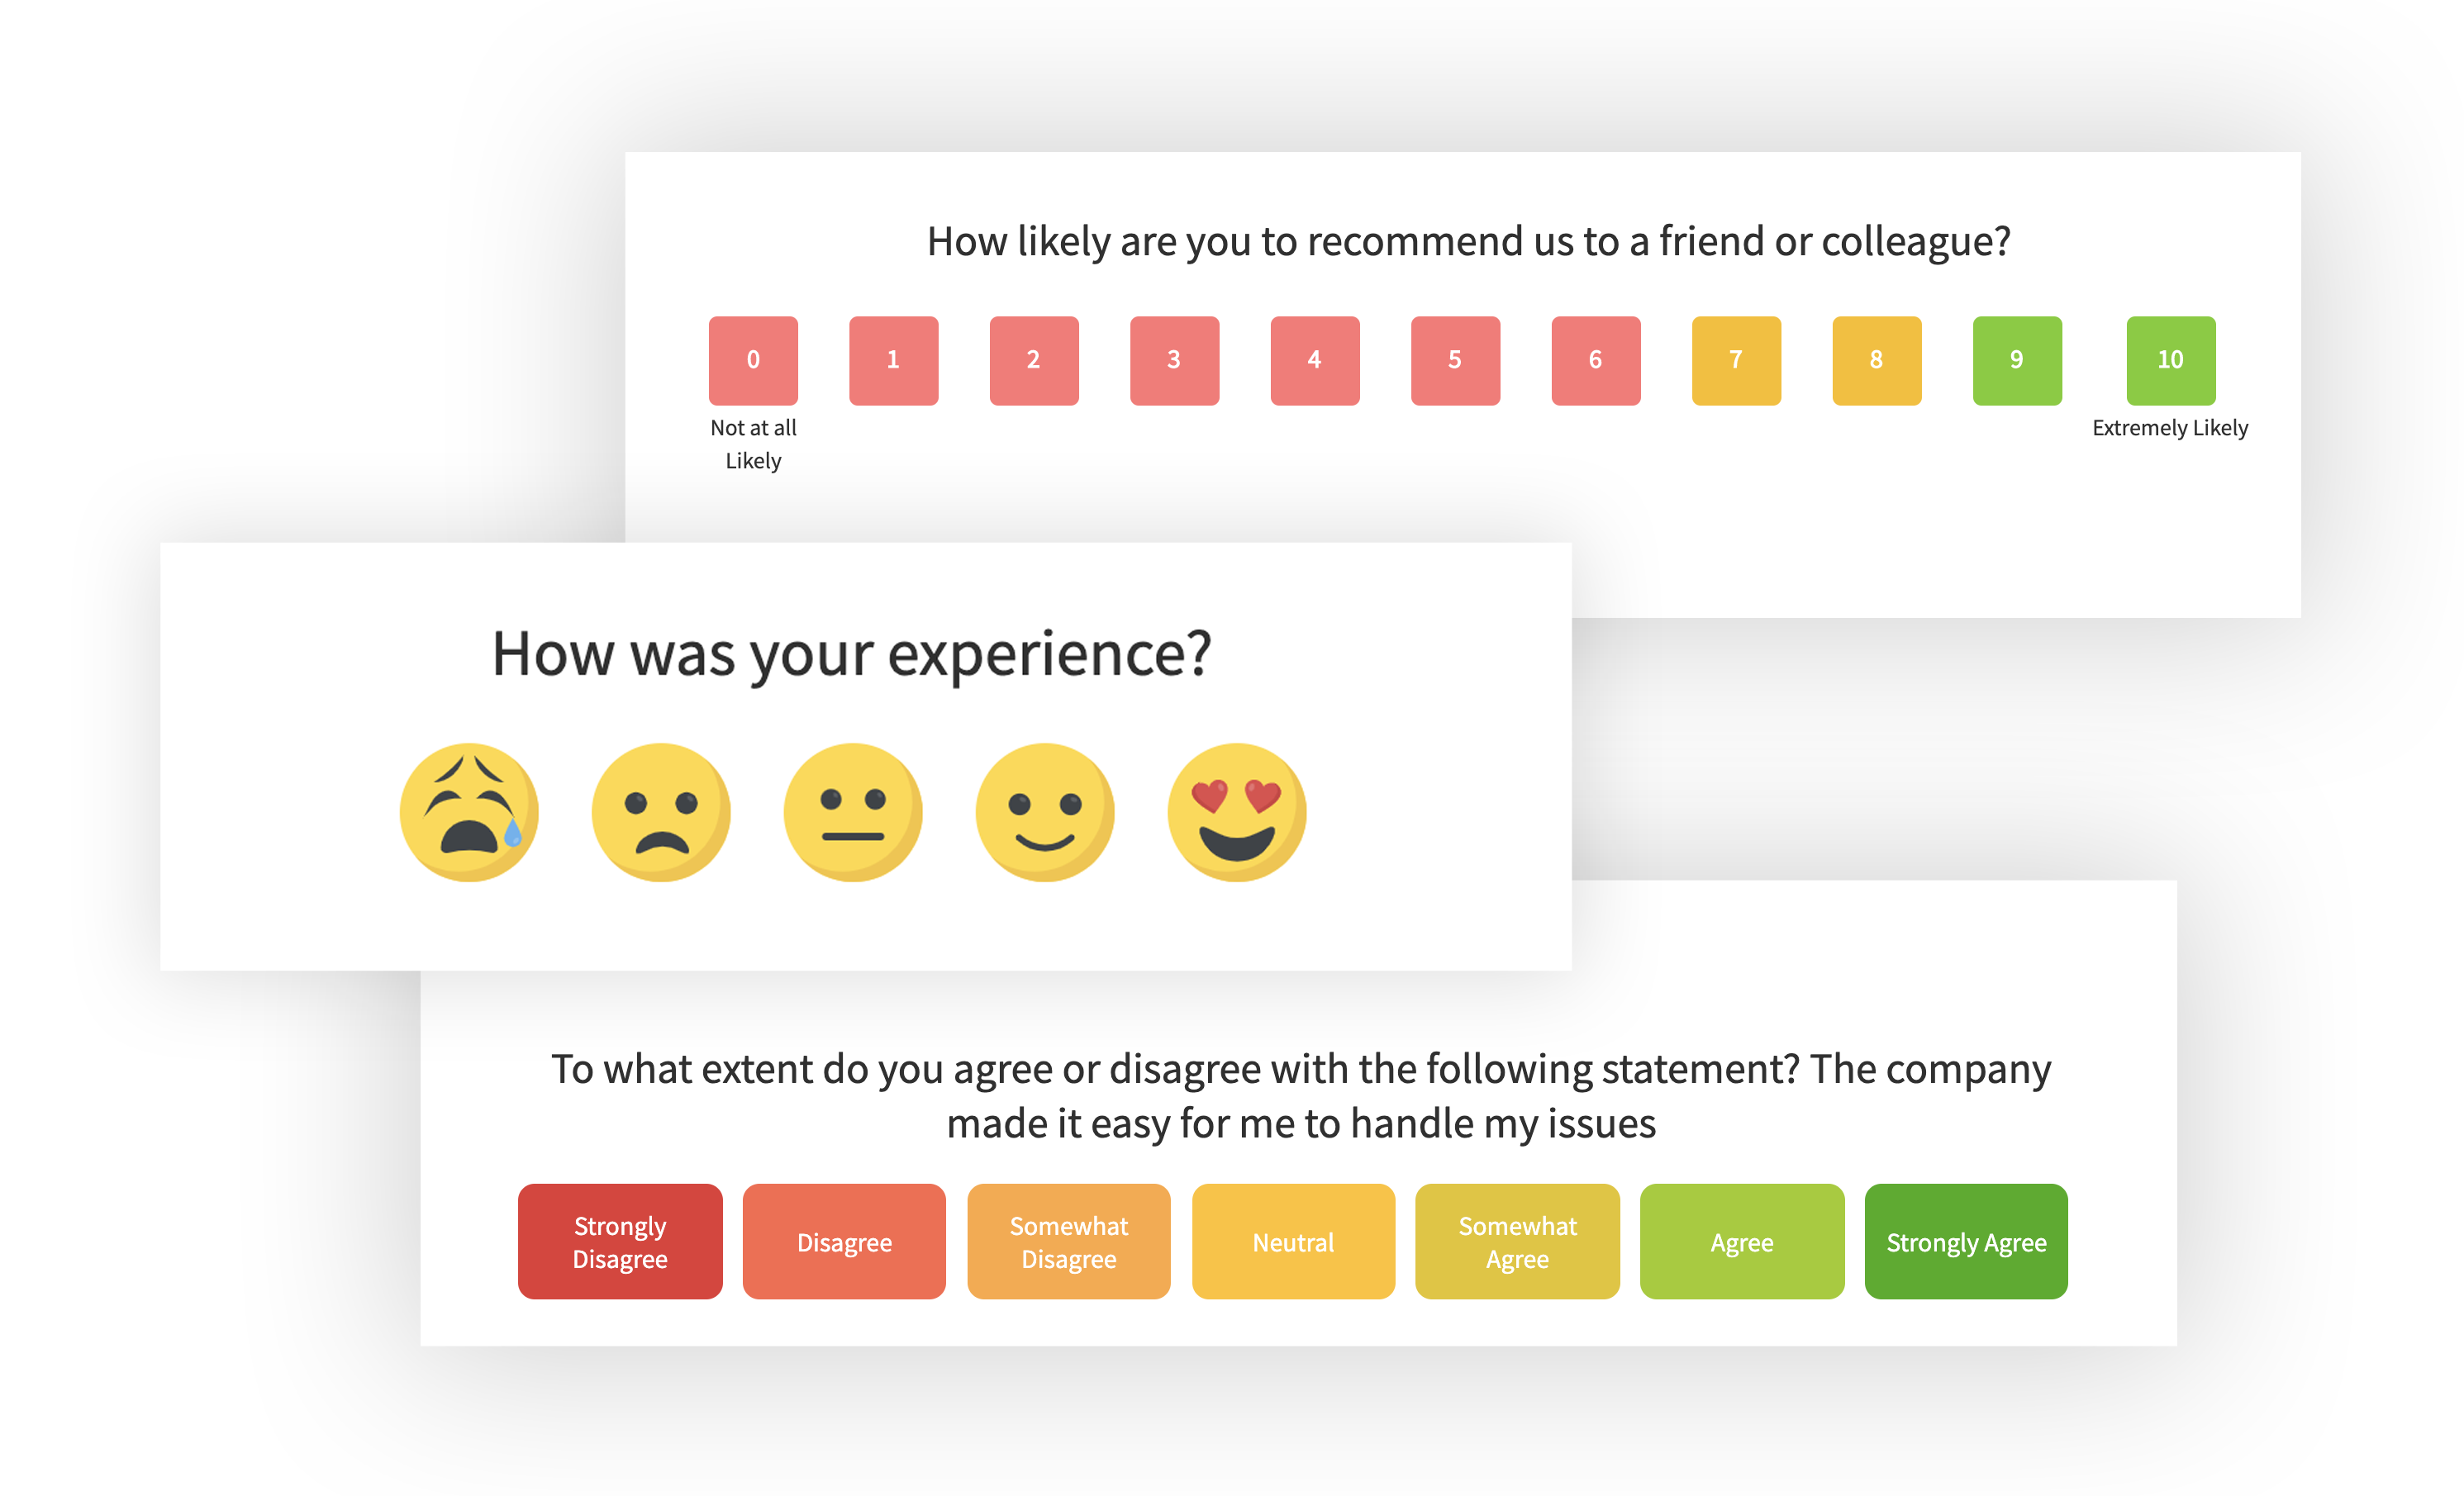 NPS, CSAT, and CES surveys to collect Product Feedback